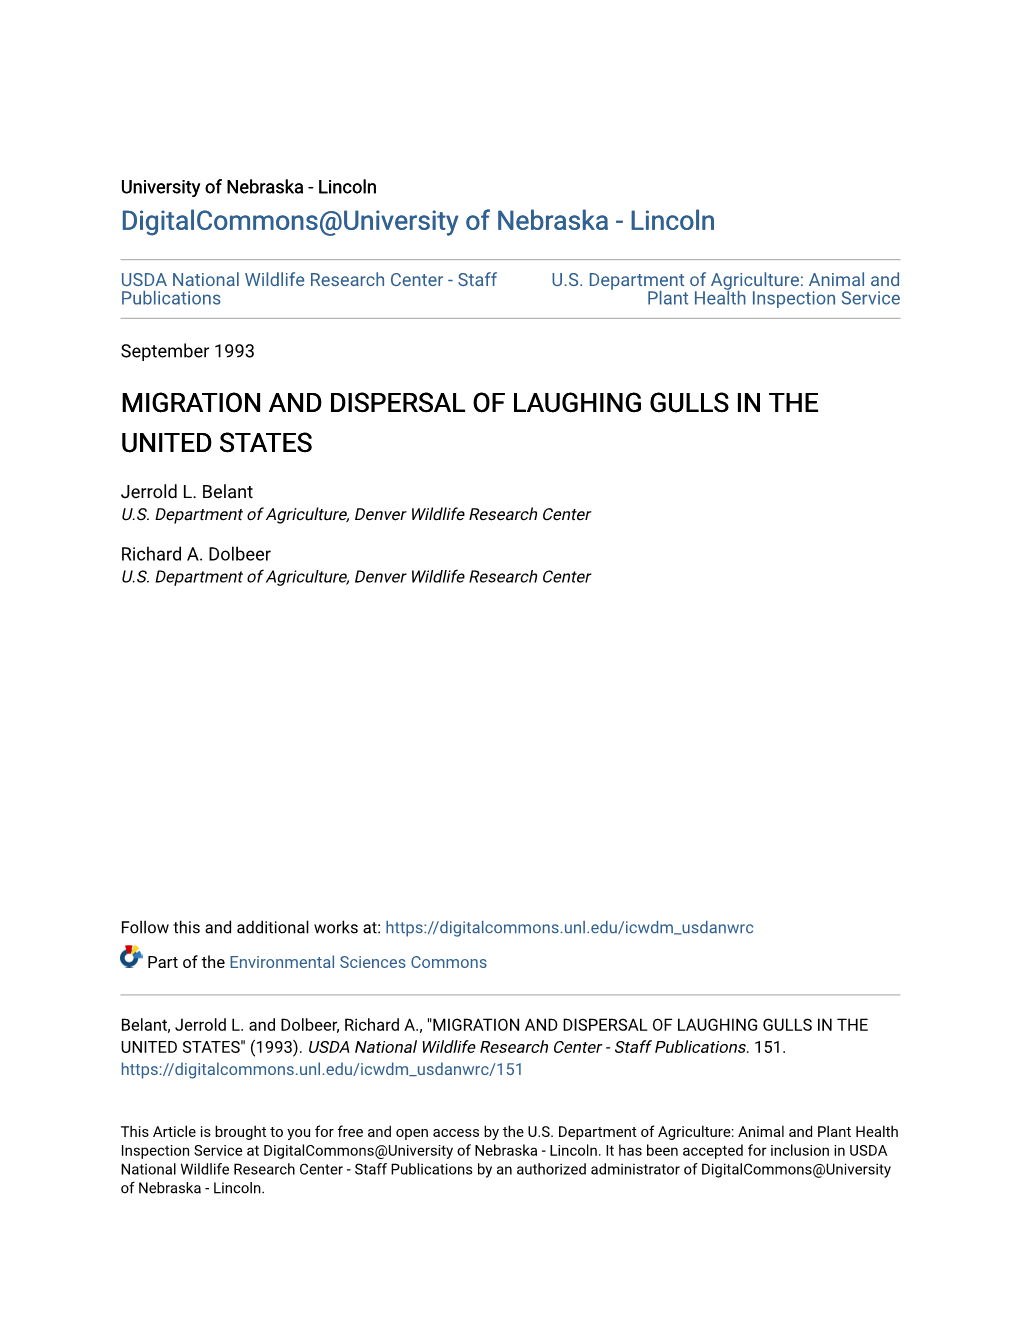 Migration and Dispersal of Laughing Gulls in the United States